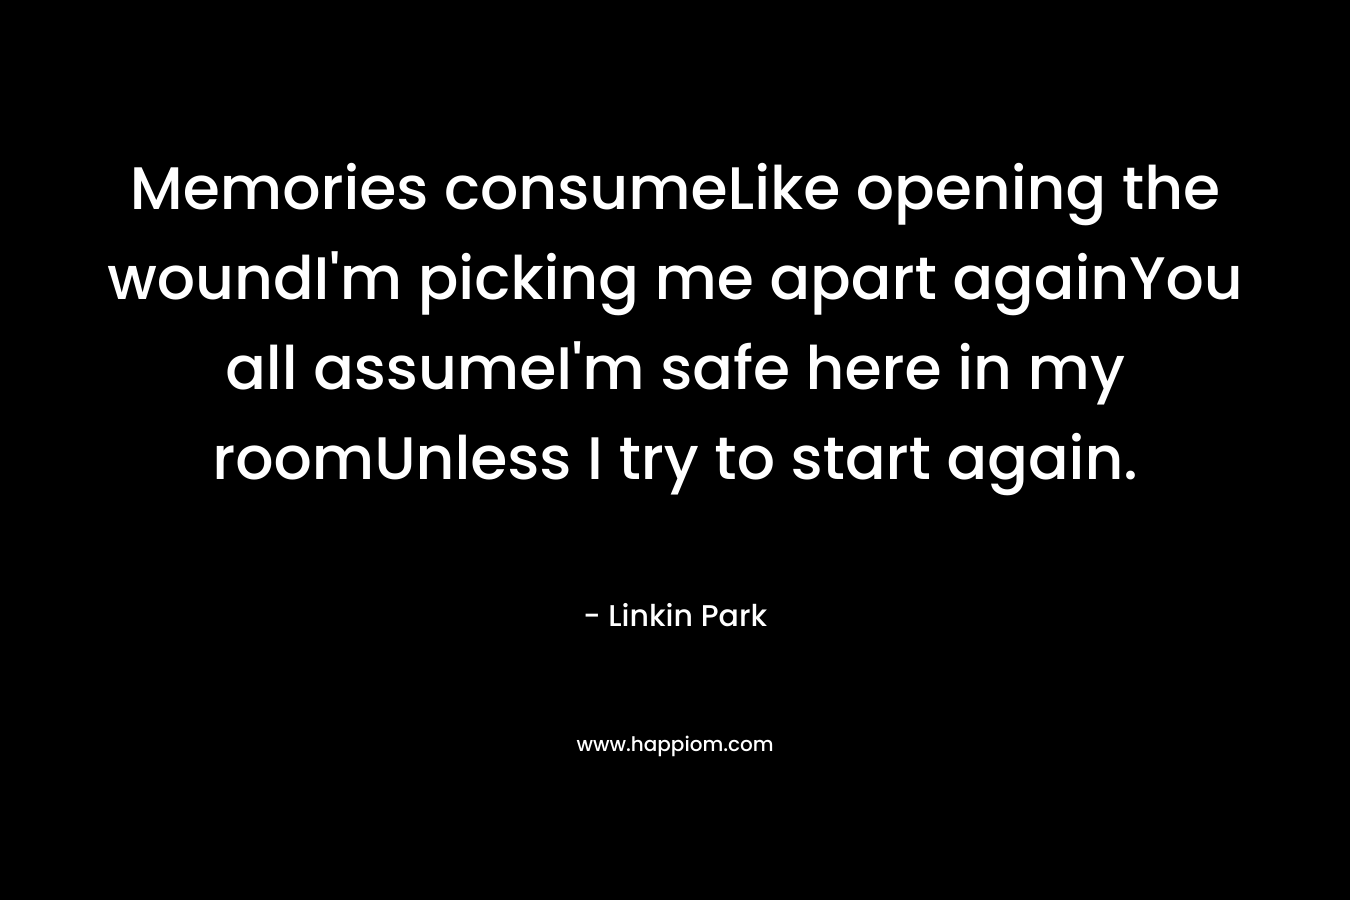 Memories consumeLike opening the woundI’m picking me apart againYou all assumeI’m safe here in my roomUnless I try to start again. – Linkin Park